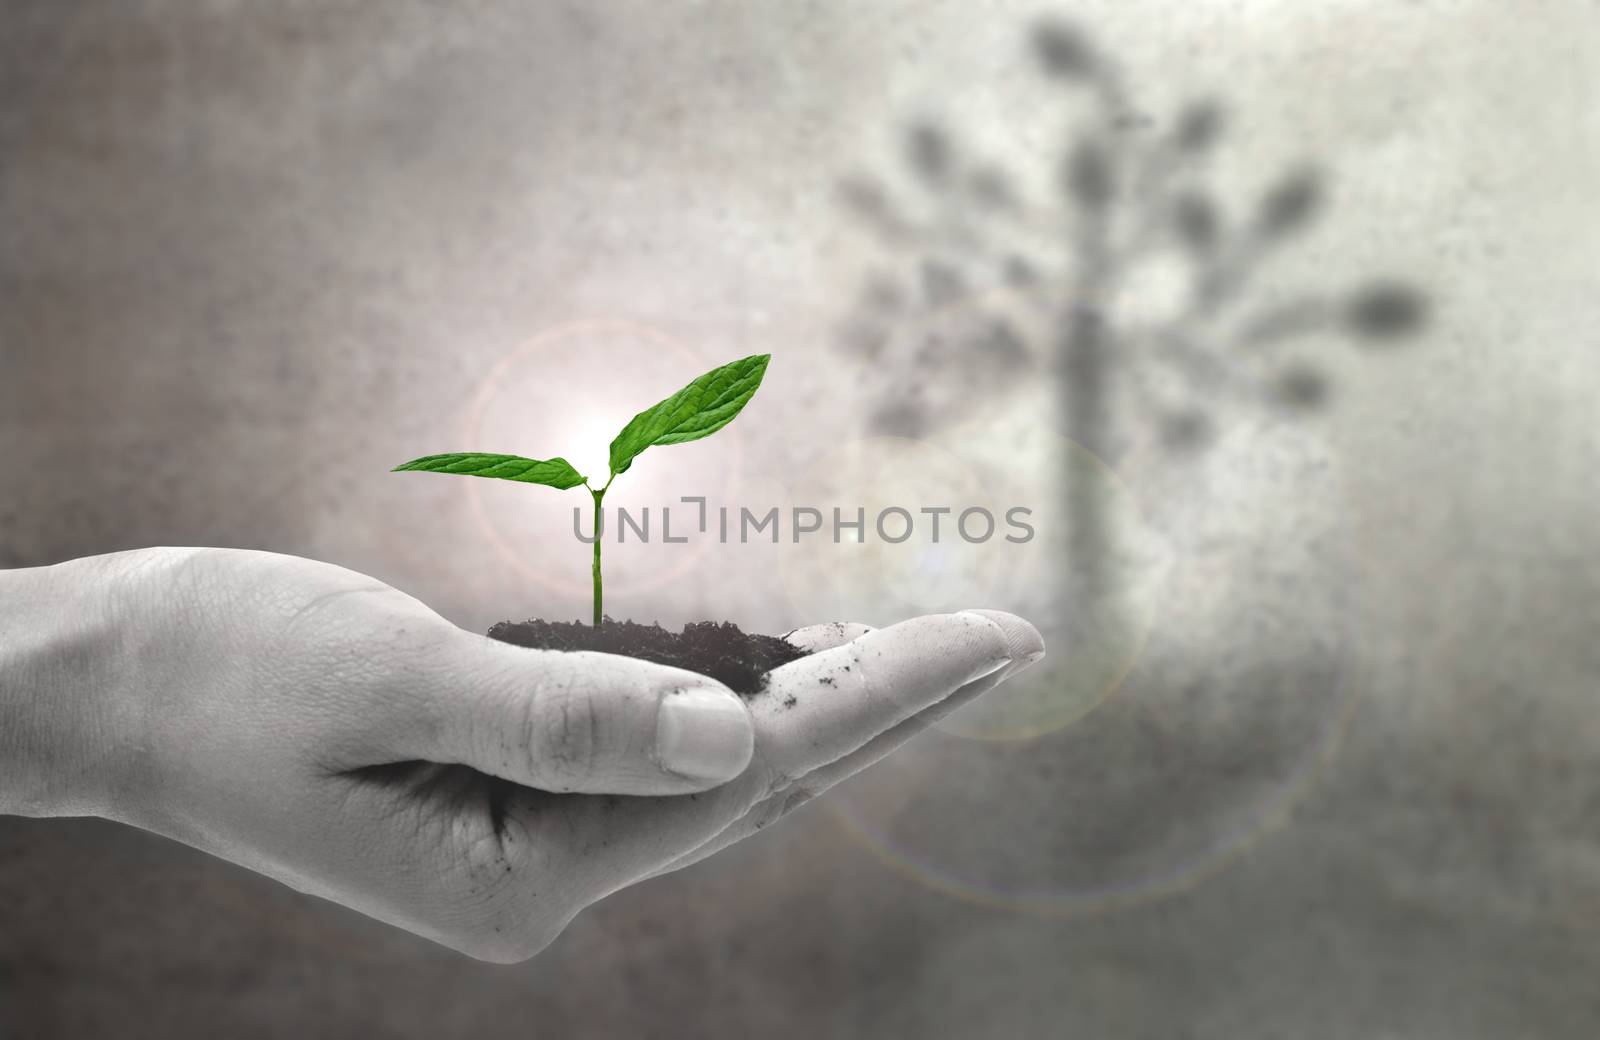 Large tree shadowing a small plant seedling in a hand